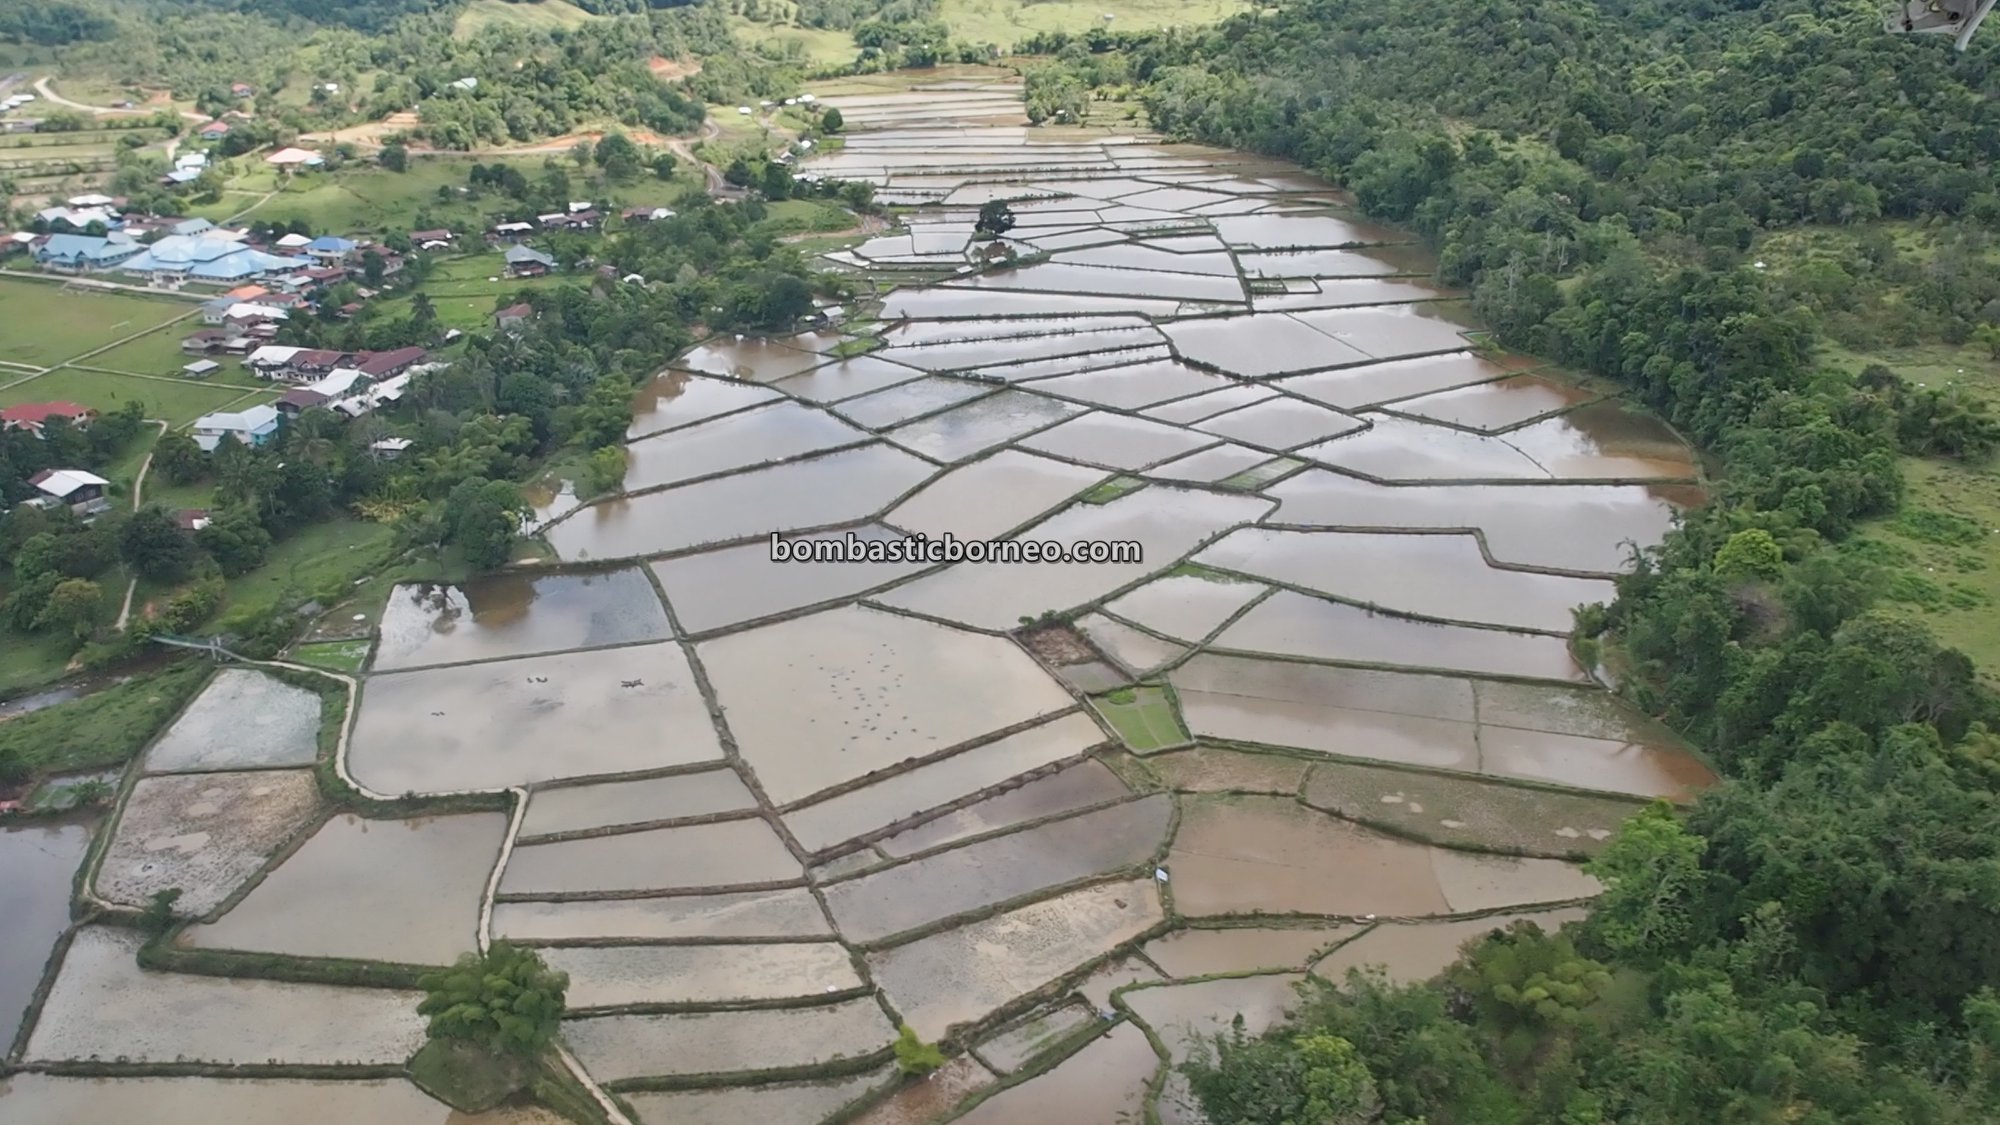 paddy fields, Bakelalan Highlands, adventure, authentic, traditional, backpackers, destination, exploration, Interior village, native, Malaysia, Sarawak, tourist attraction, travel guide, Borneo,